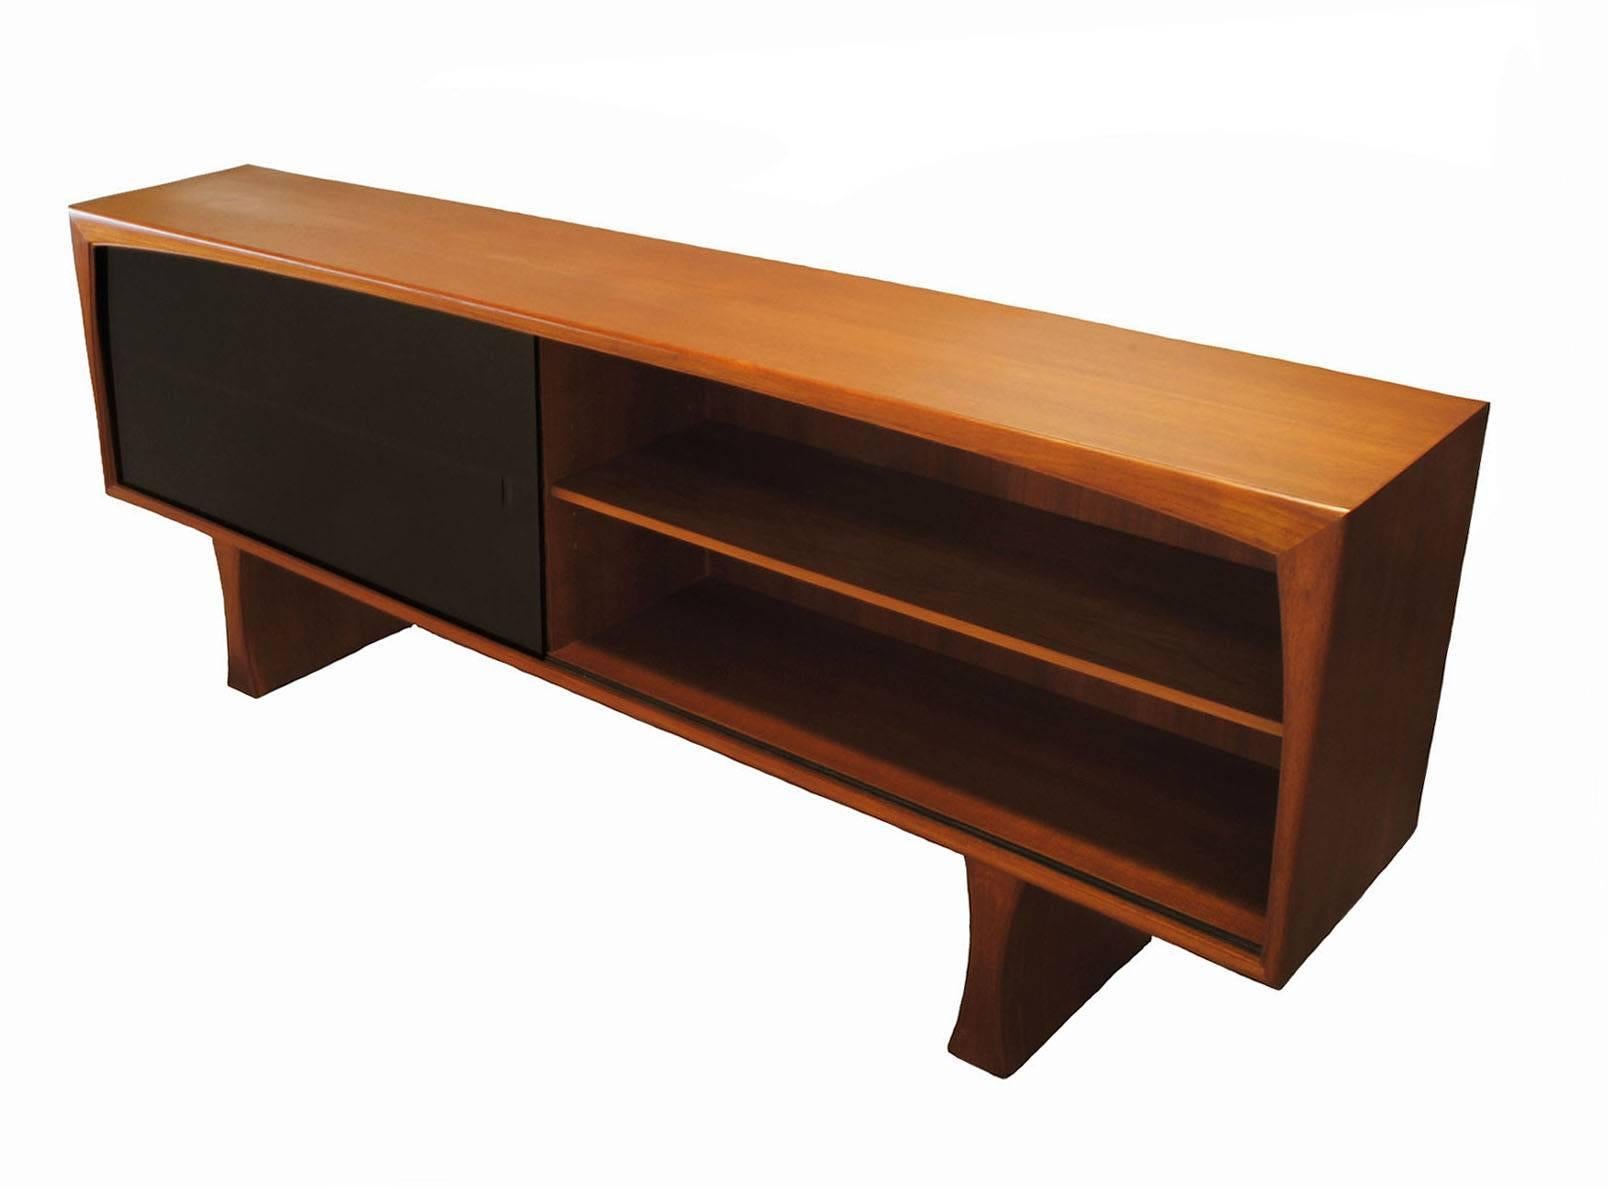 A gorgeous Danish modern era teak hutch from the 1960s. Attributed in design to Kai Kristiansen of Denmark and assembled in Canada by A. Jensen & Son Limited. Quality craftsmanship throughout with an attractive shapely trim and sculpted form